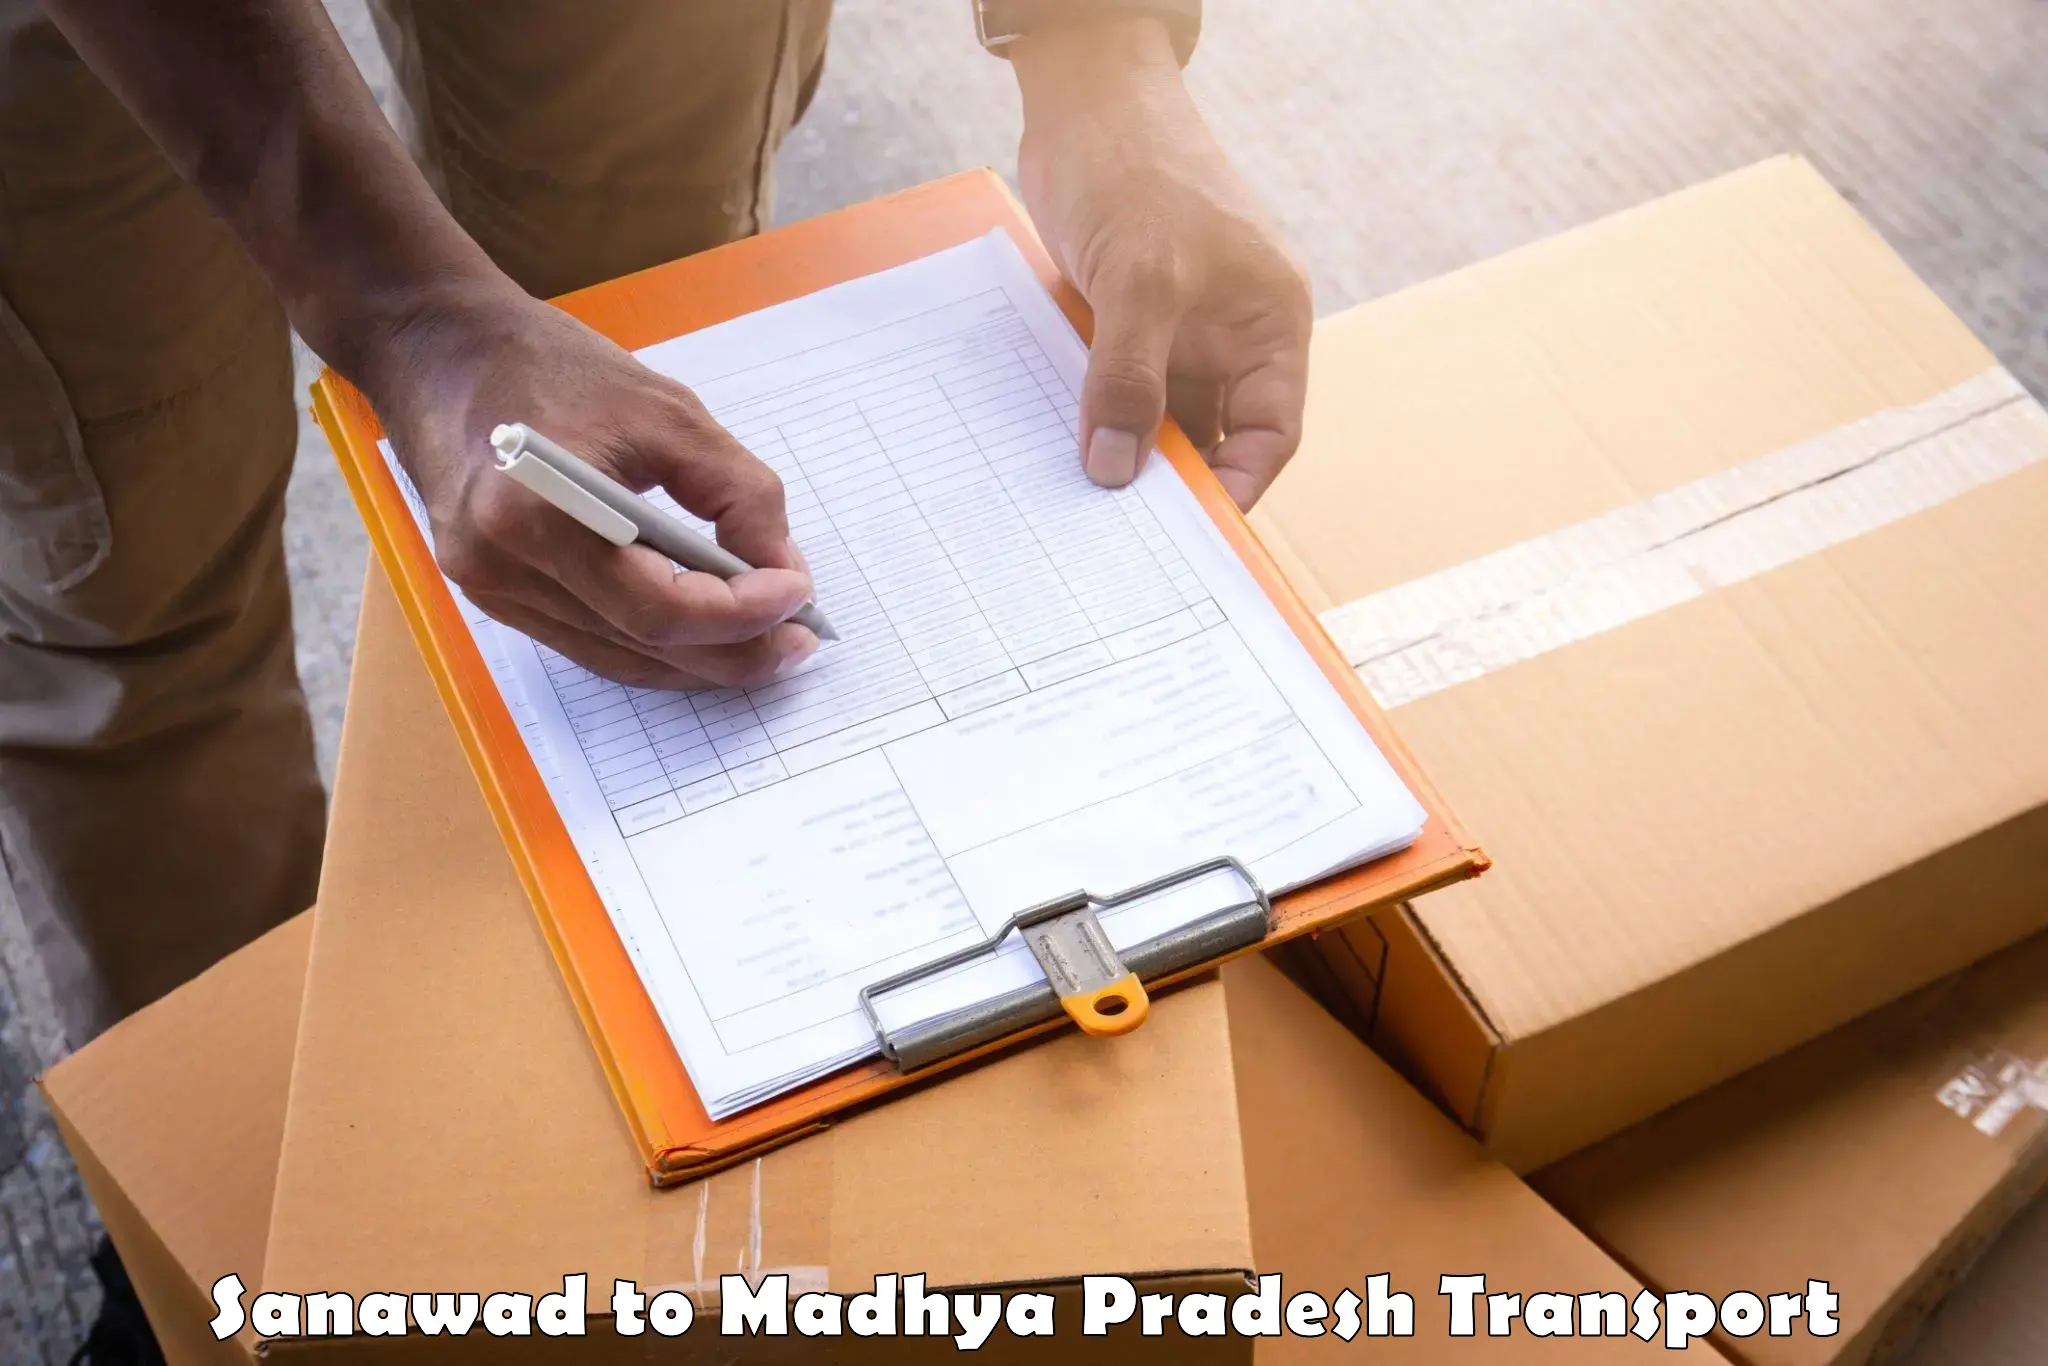 Vehicle transport services Sanawad to Indore